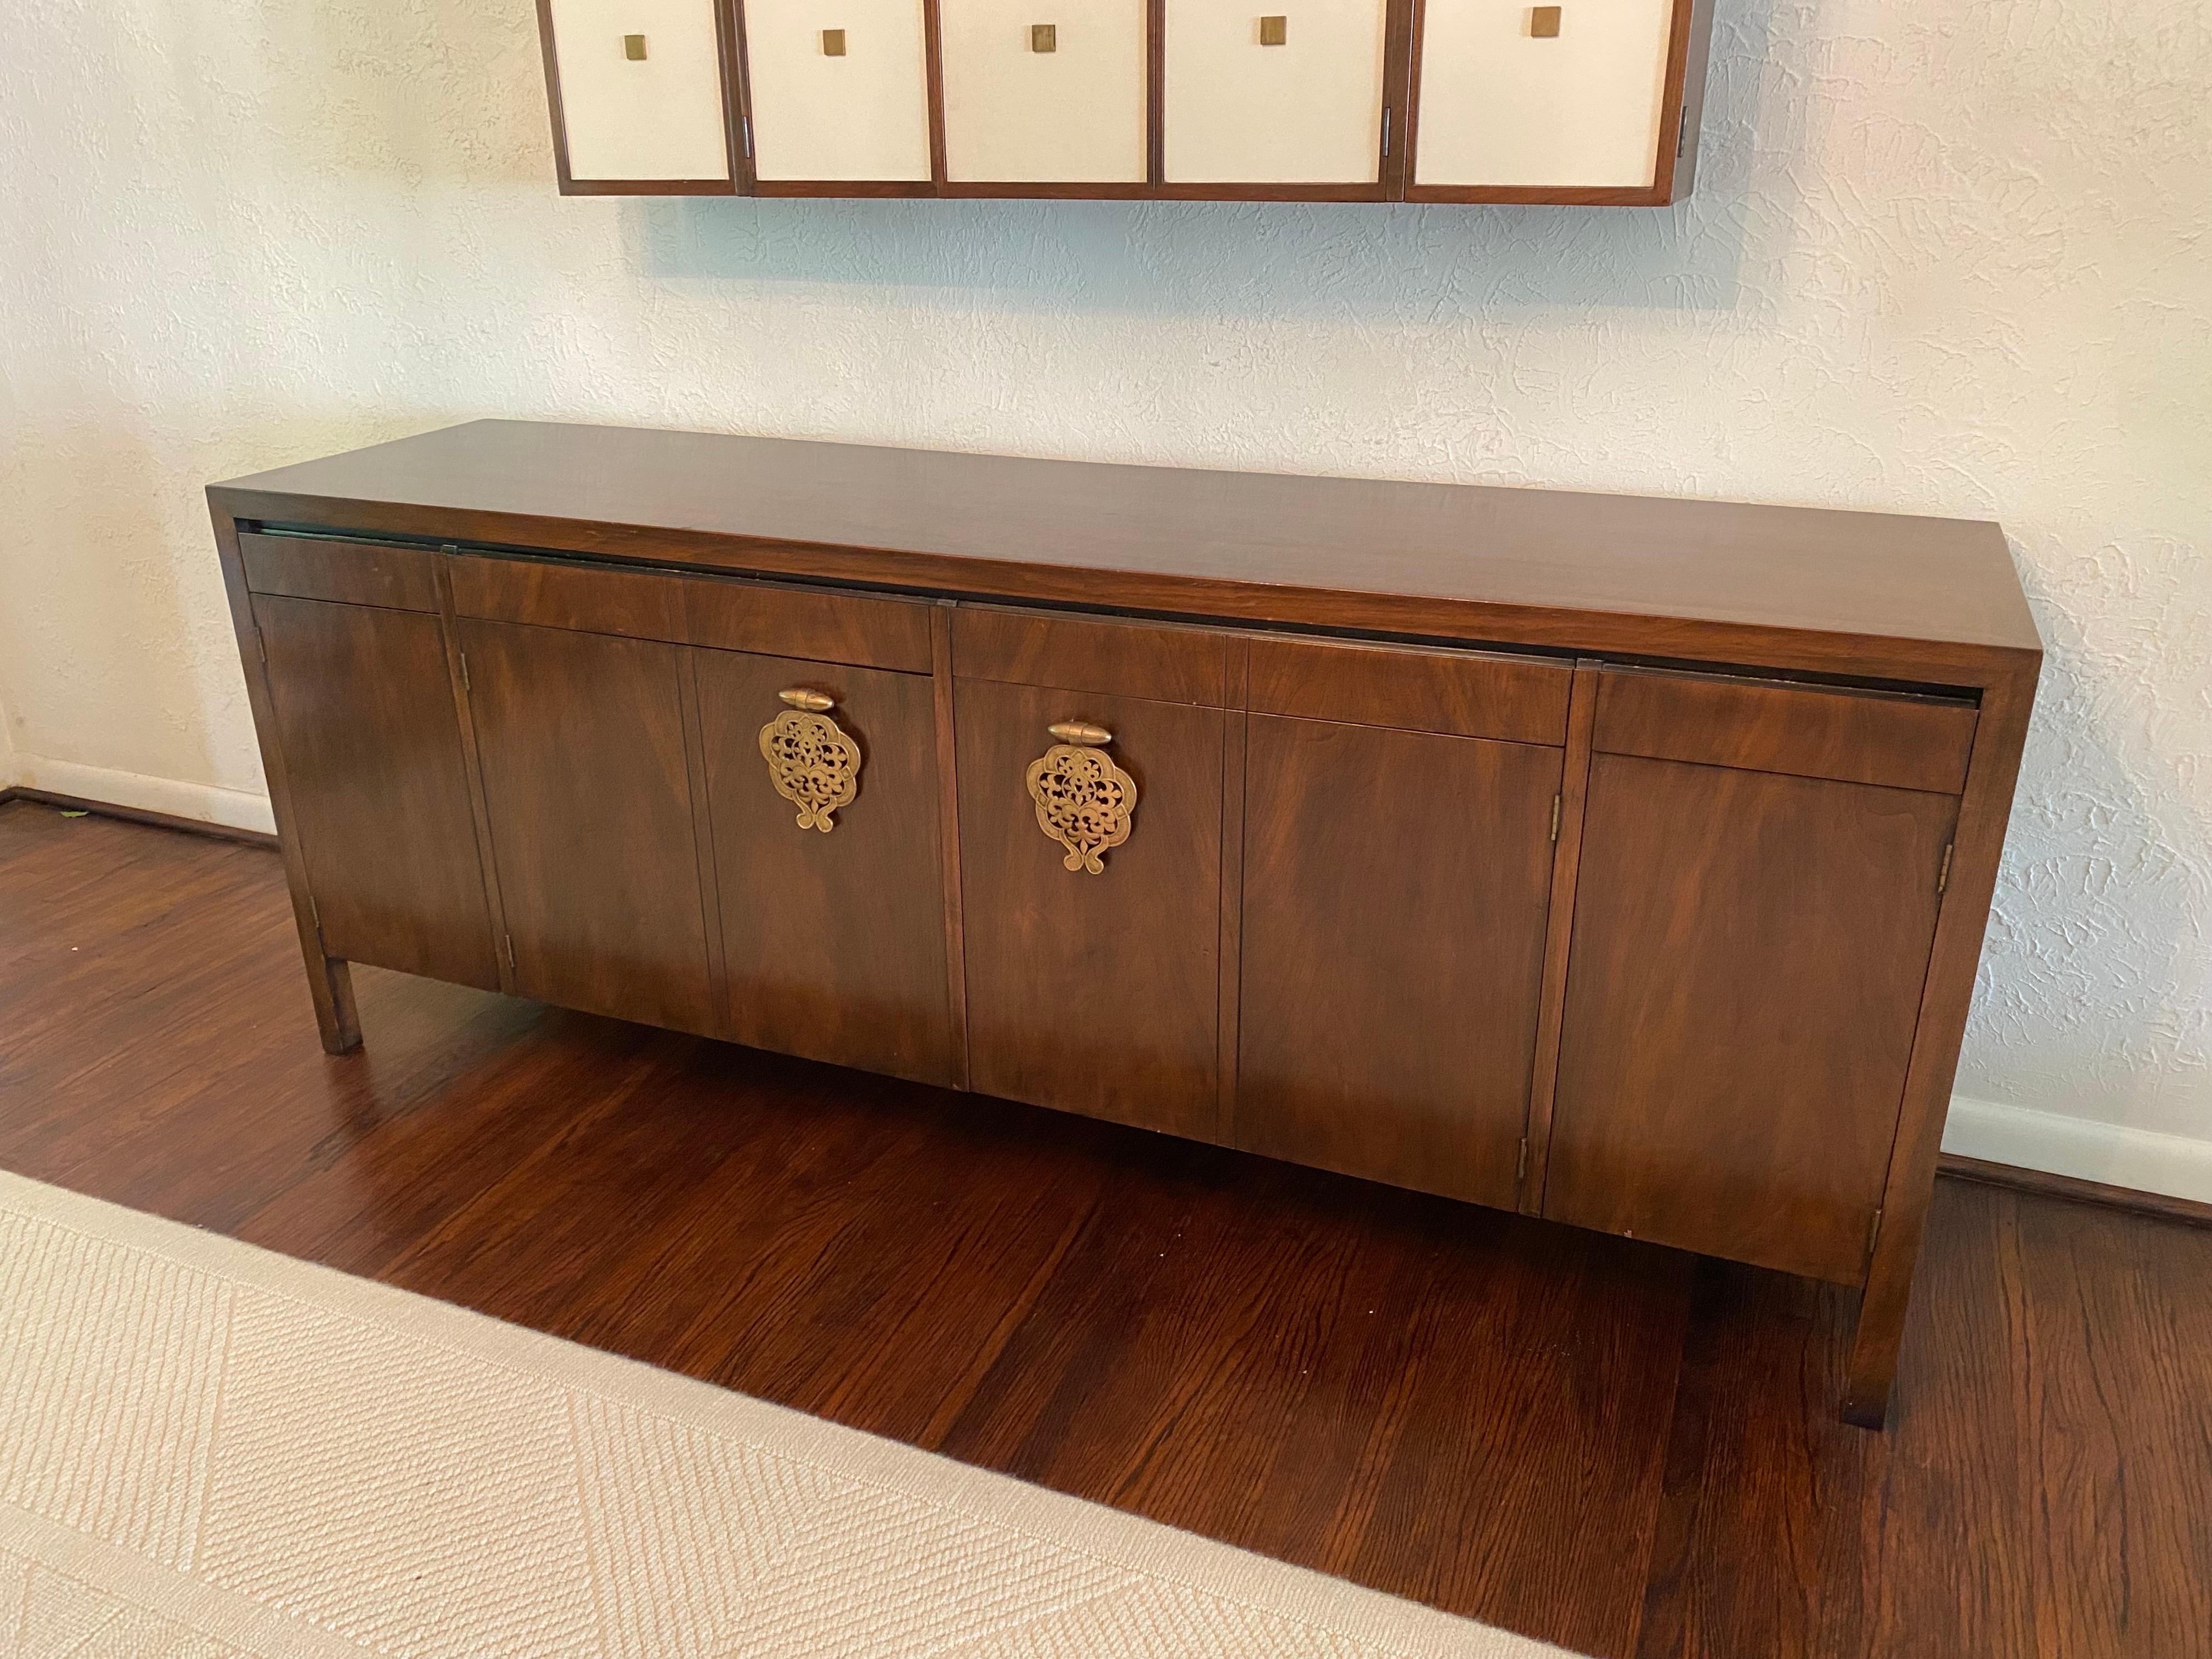 Bert England for Johnson Furniture Company Asian Inspired Buffet/ Credenza.  Walnut with giant oversized hanging handles.  In very nice Original condition.  Bought from the Original Owners, never moved until now.  Other pieces from the series listed